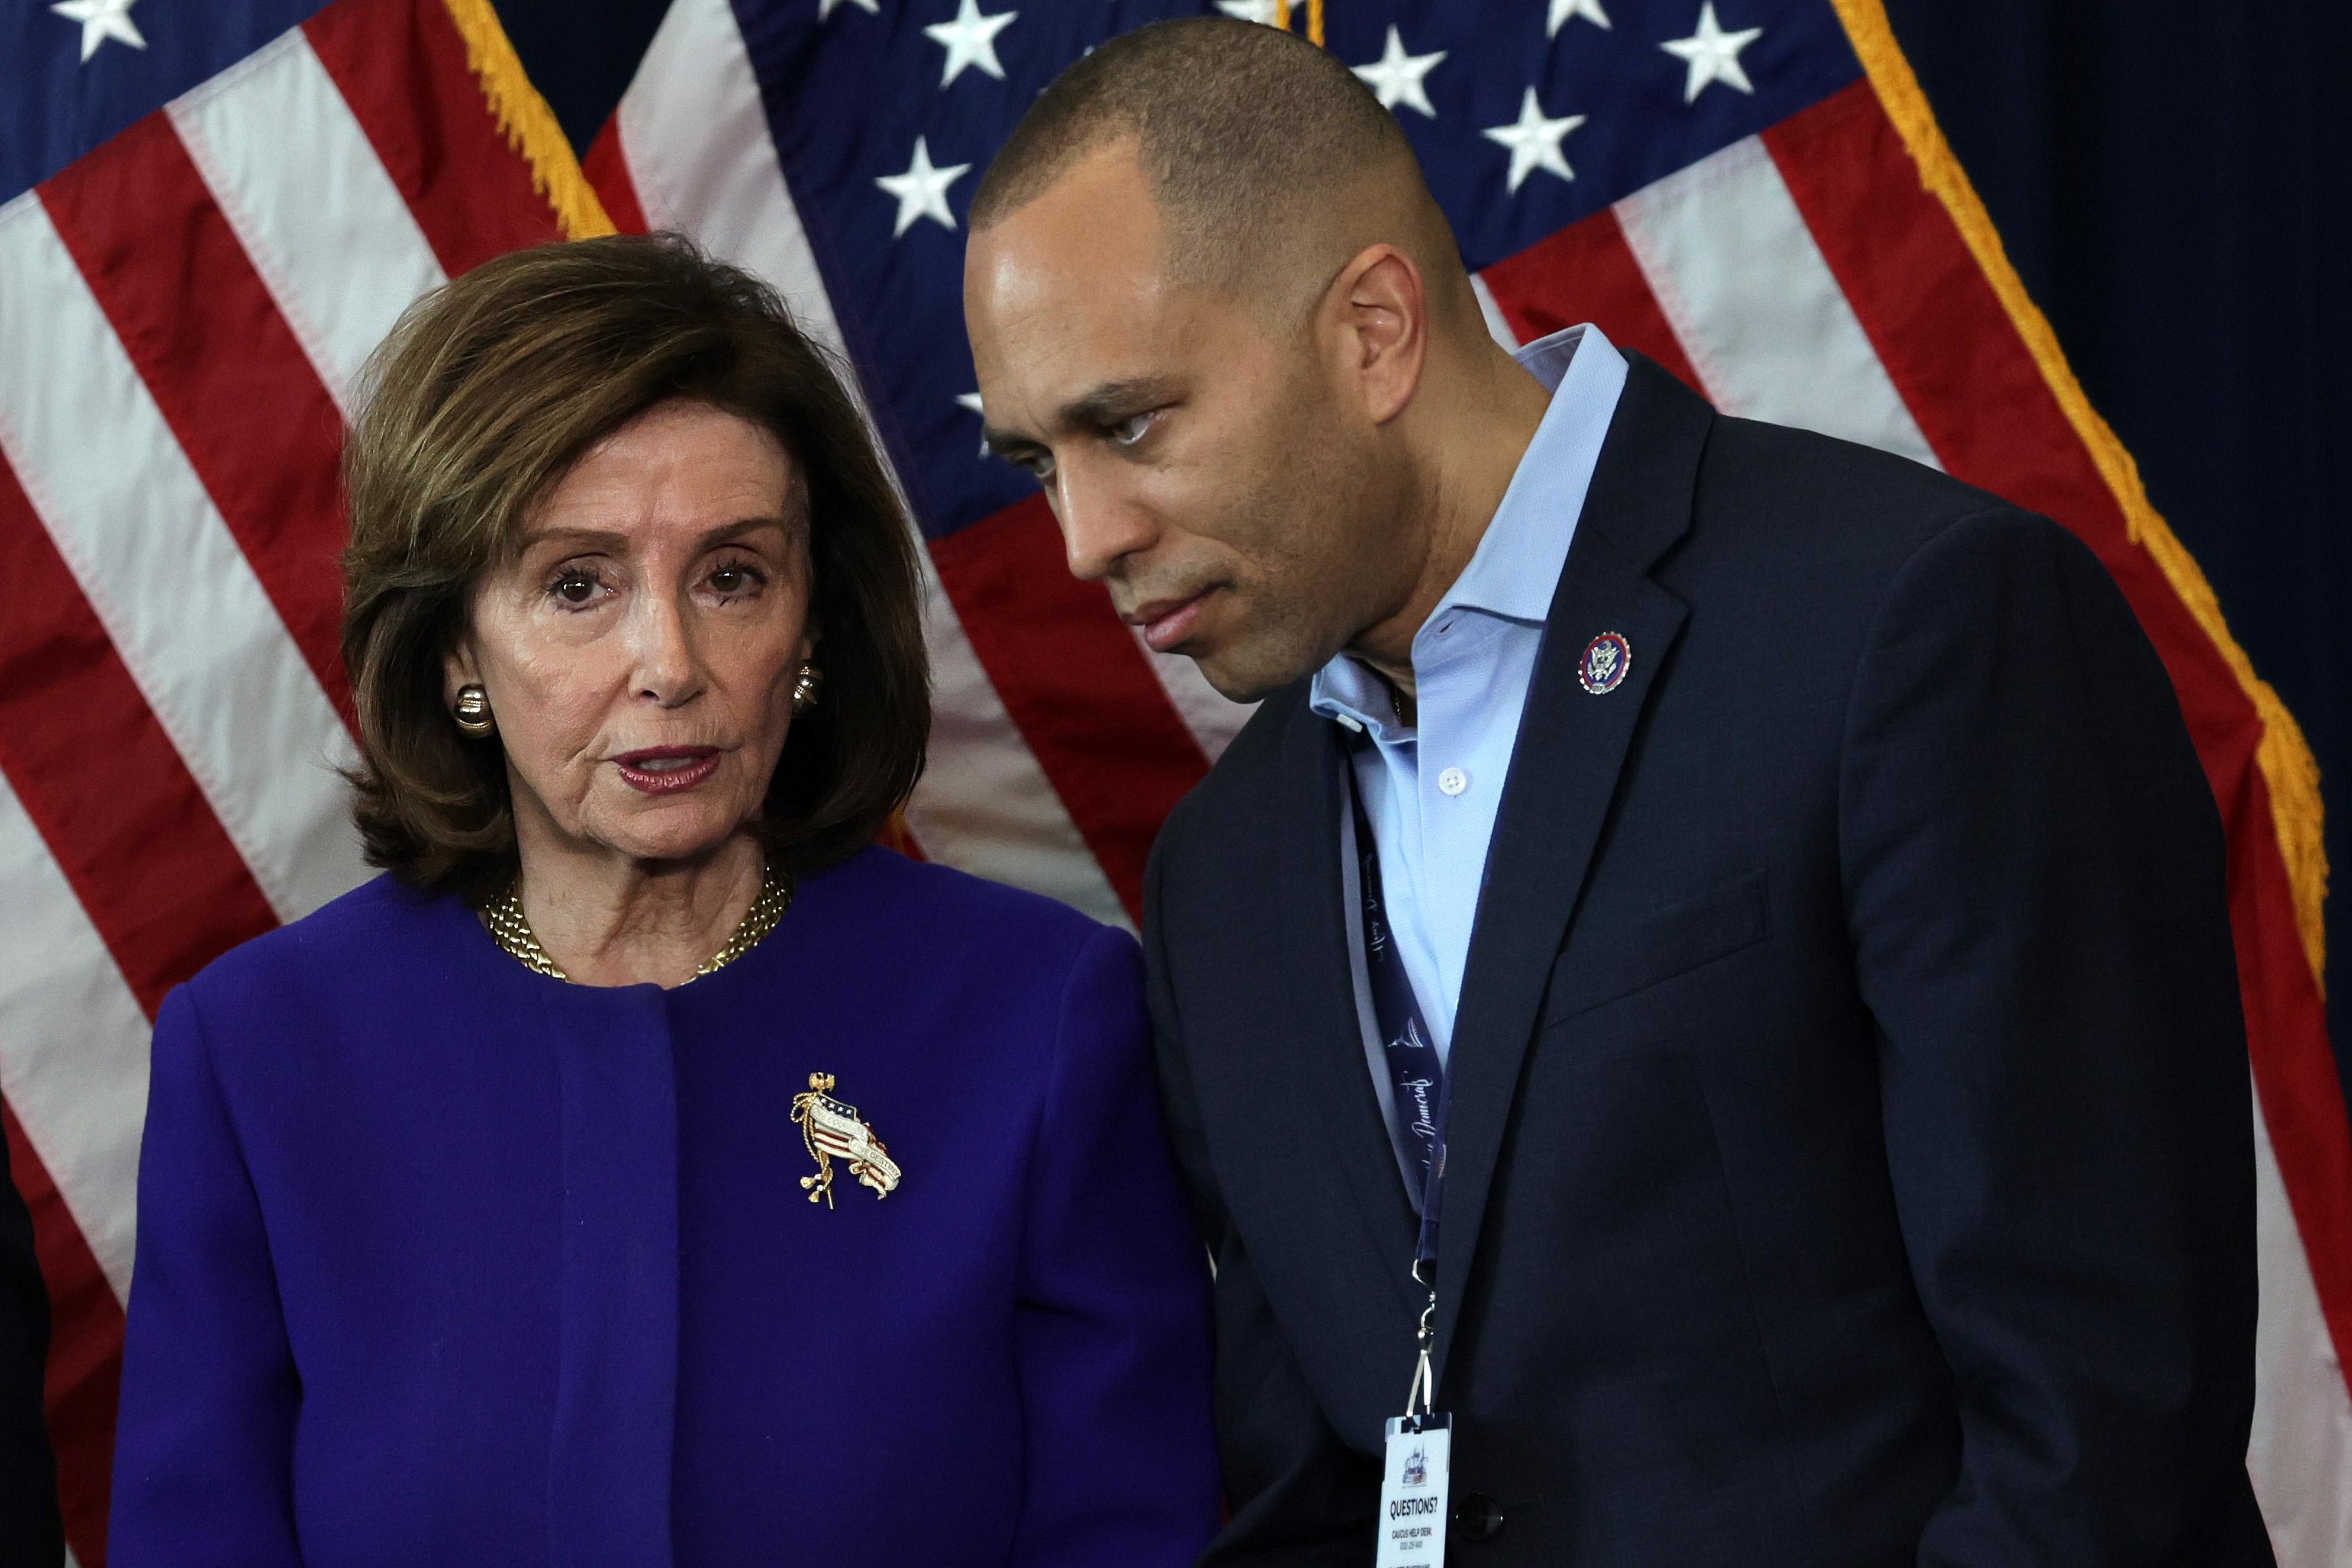 Nancy Pelosi and Hakeem Jeffries lean close to each other, talking, with American flags behind them.